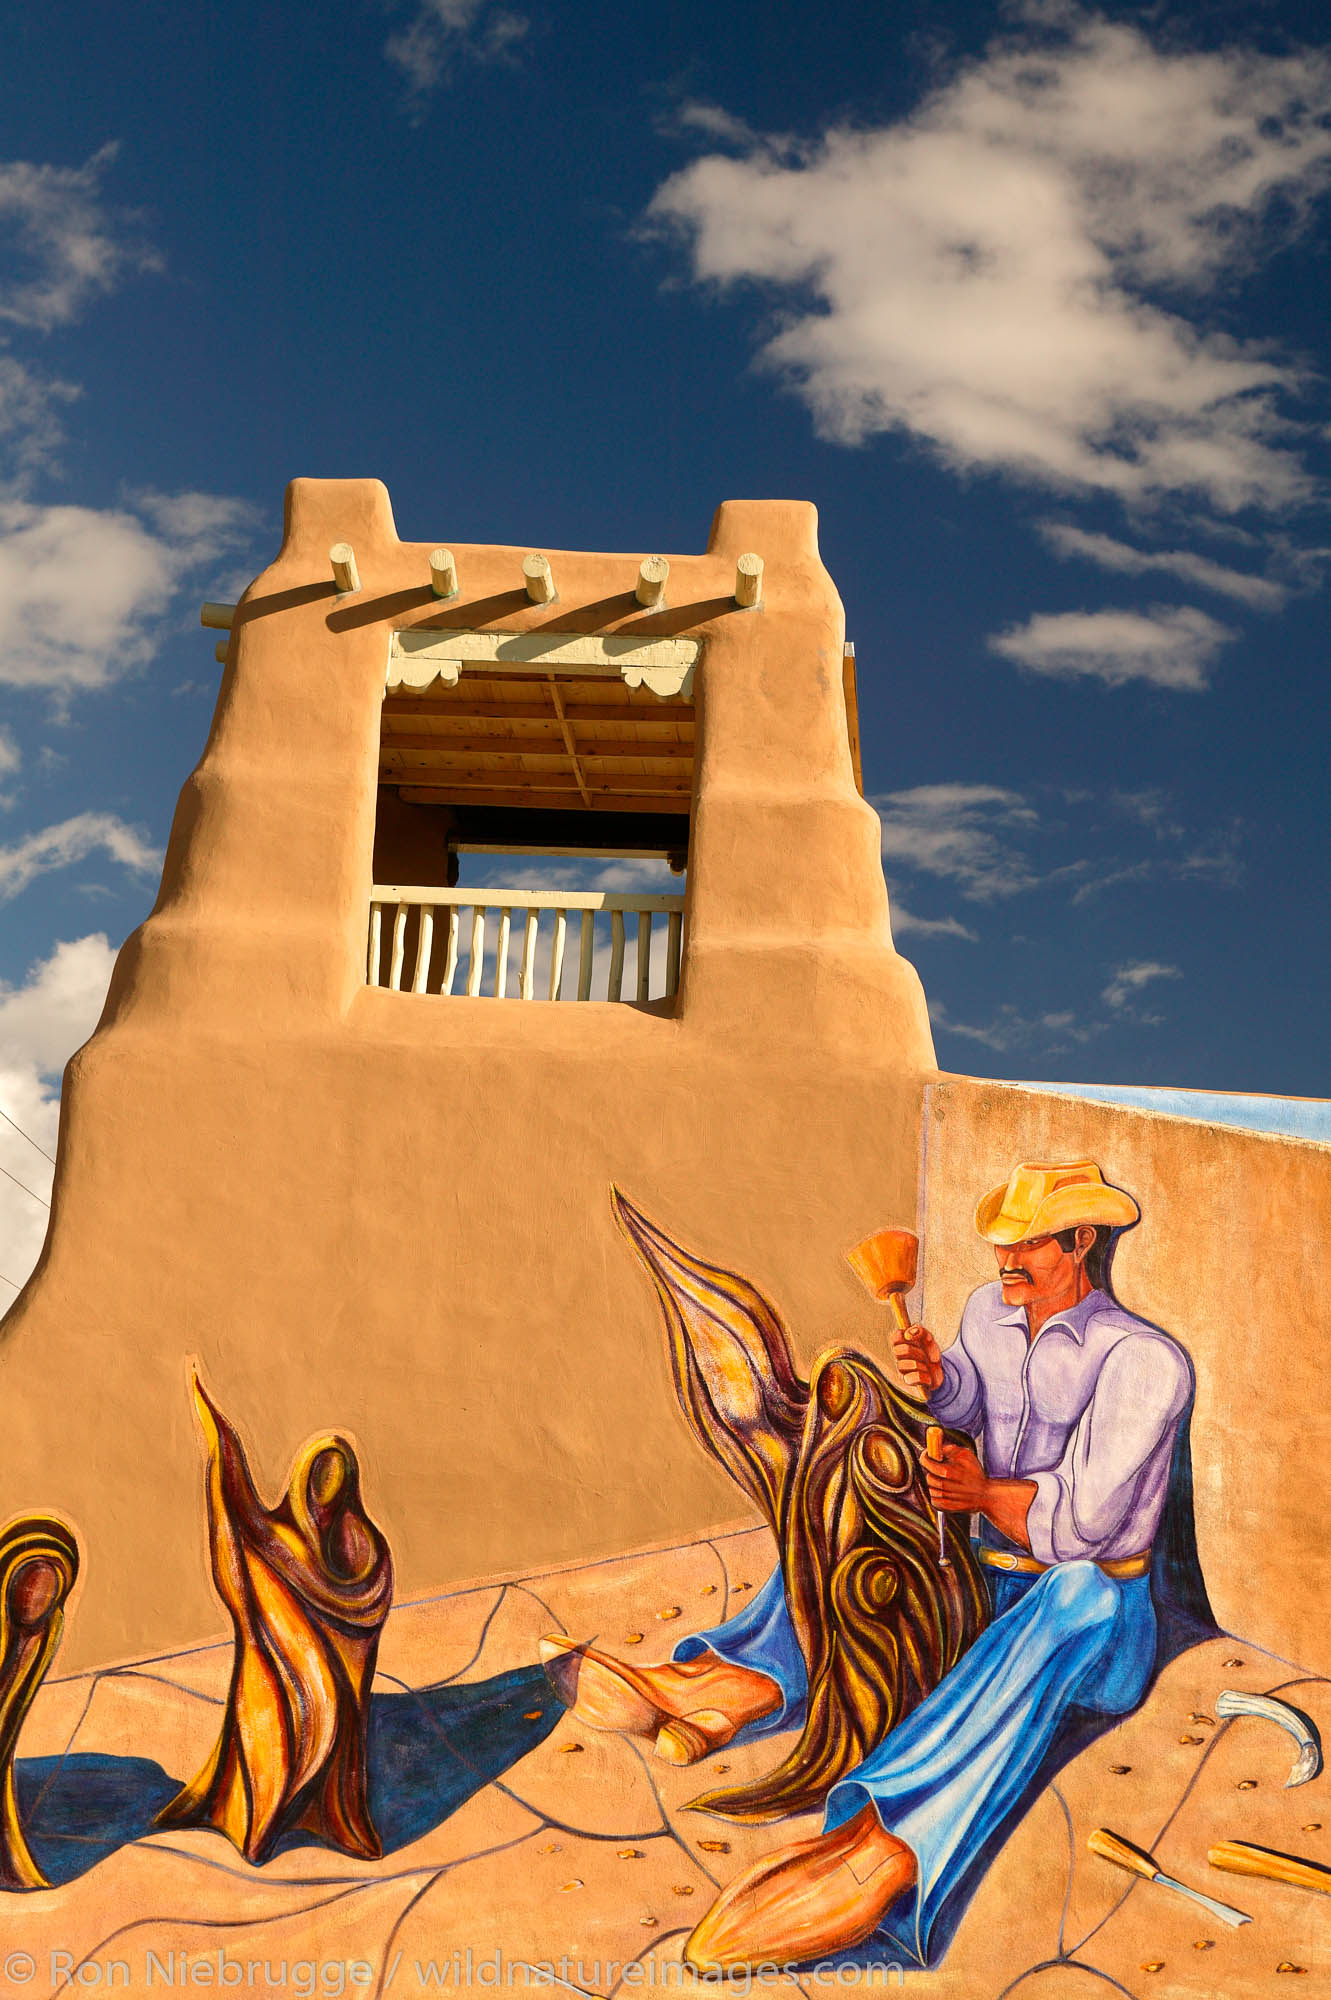 A mural on the side of a building in Taos, New Mexico.